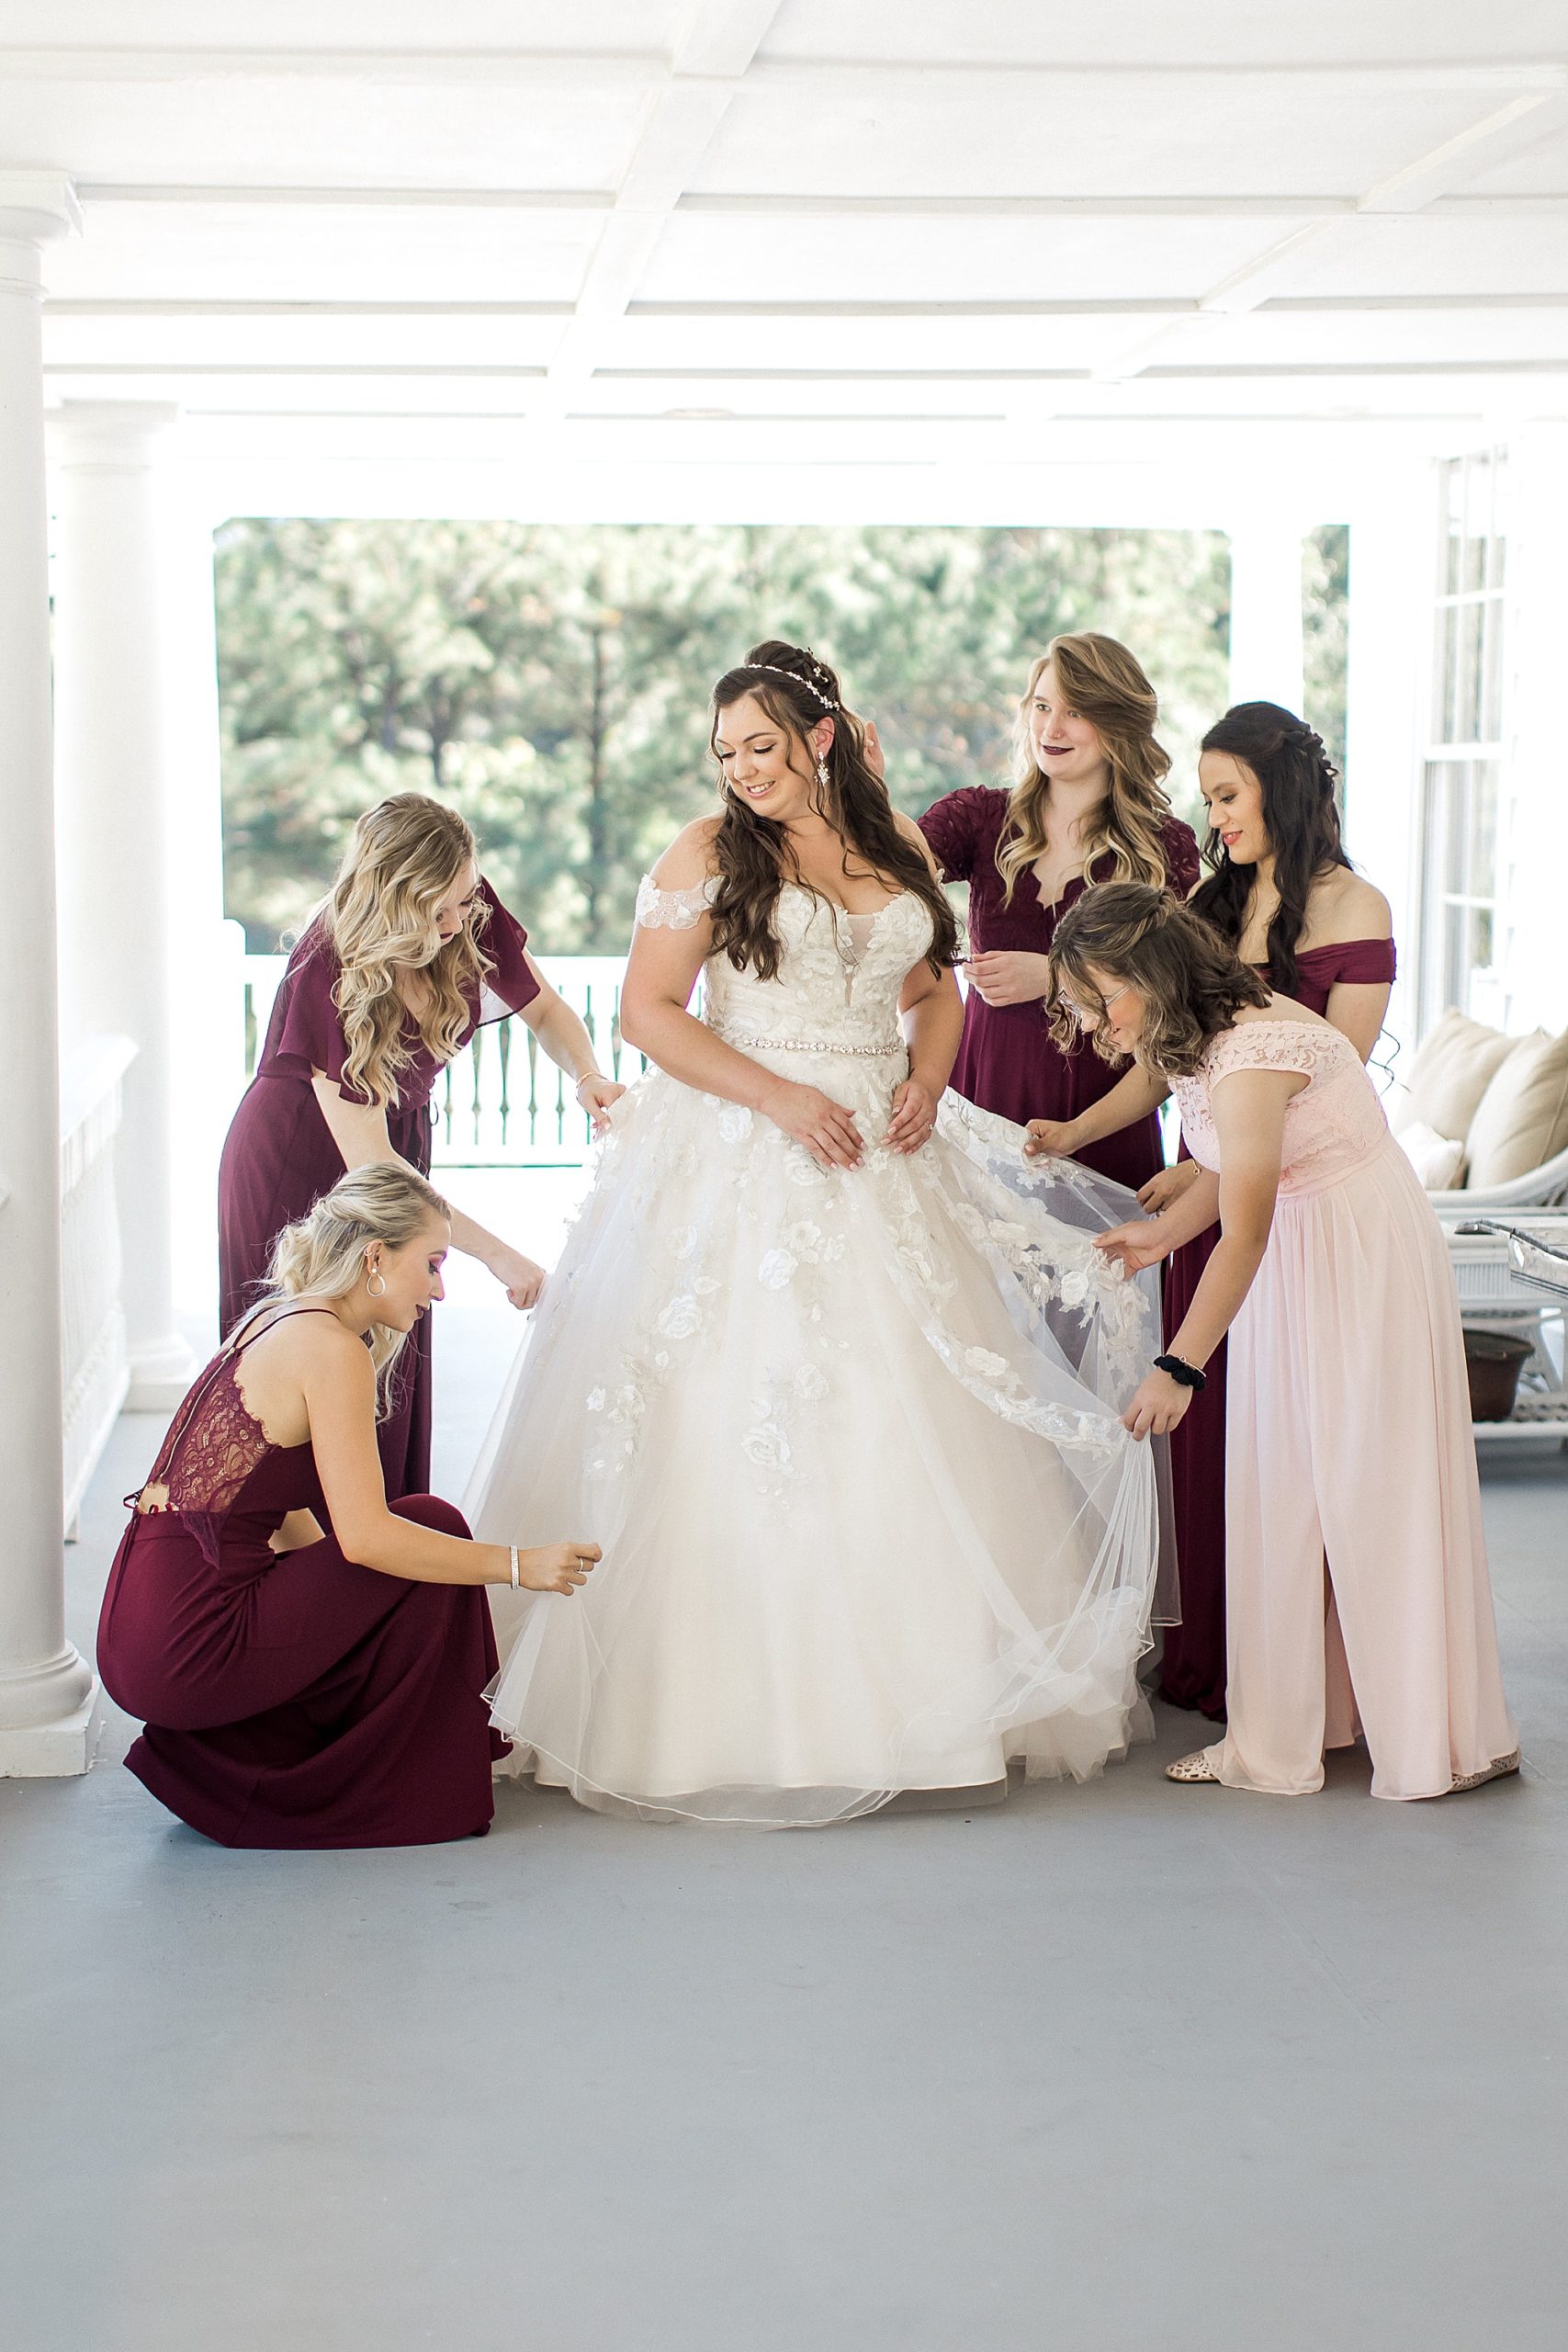 bride and her bridesmaids before wedding ceremony